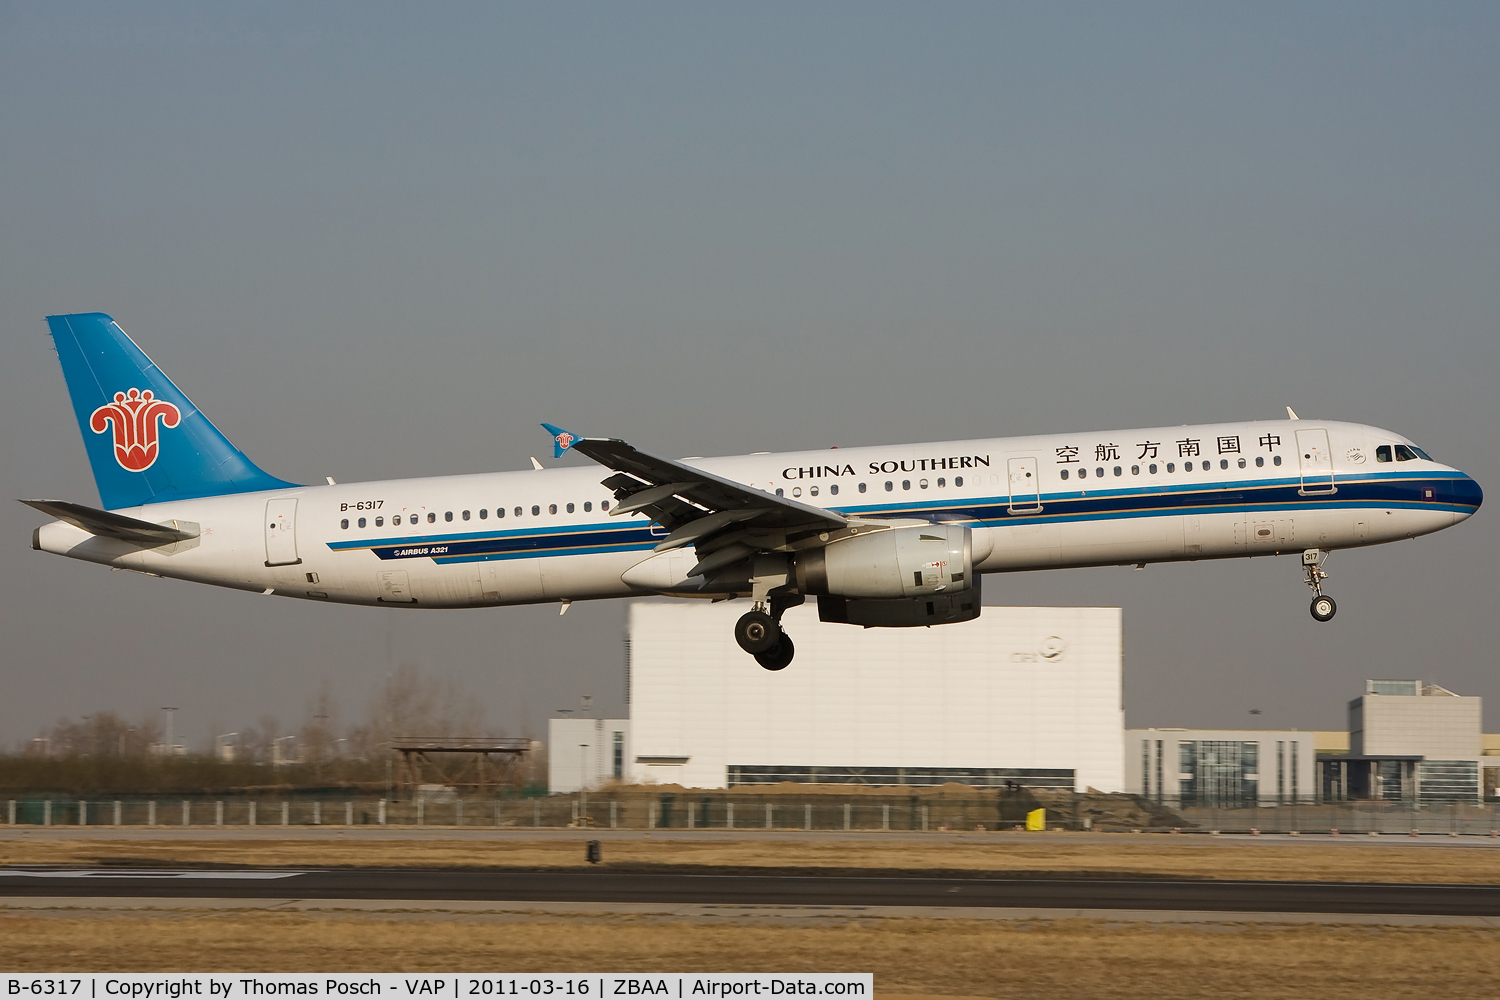 B-6317, 2007 Airbus A321-231 C/N 3217, China Southern Airlines